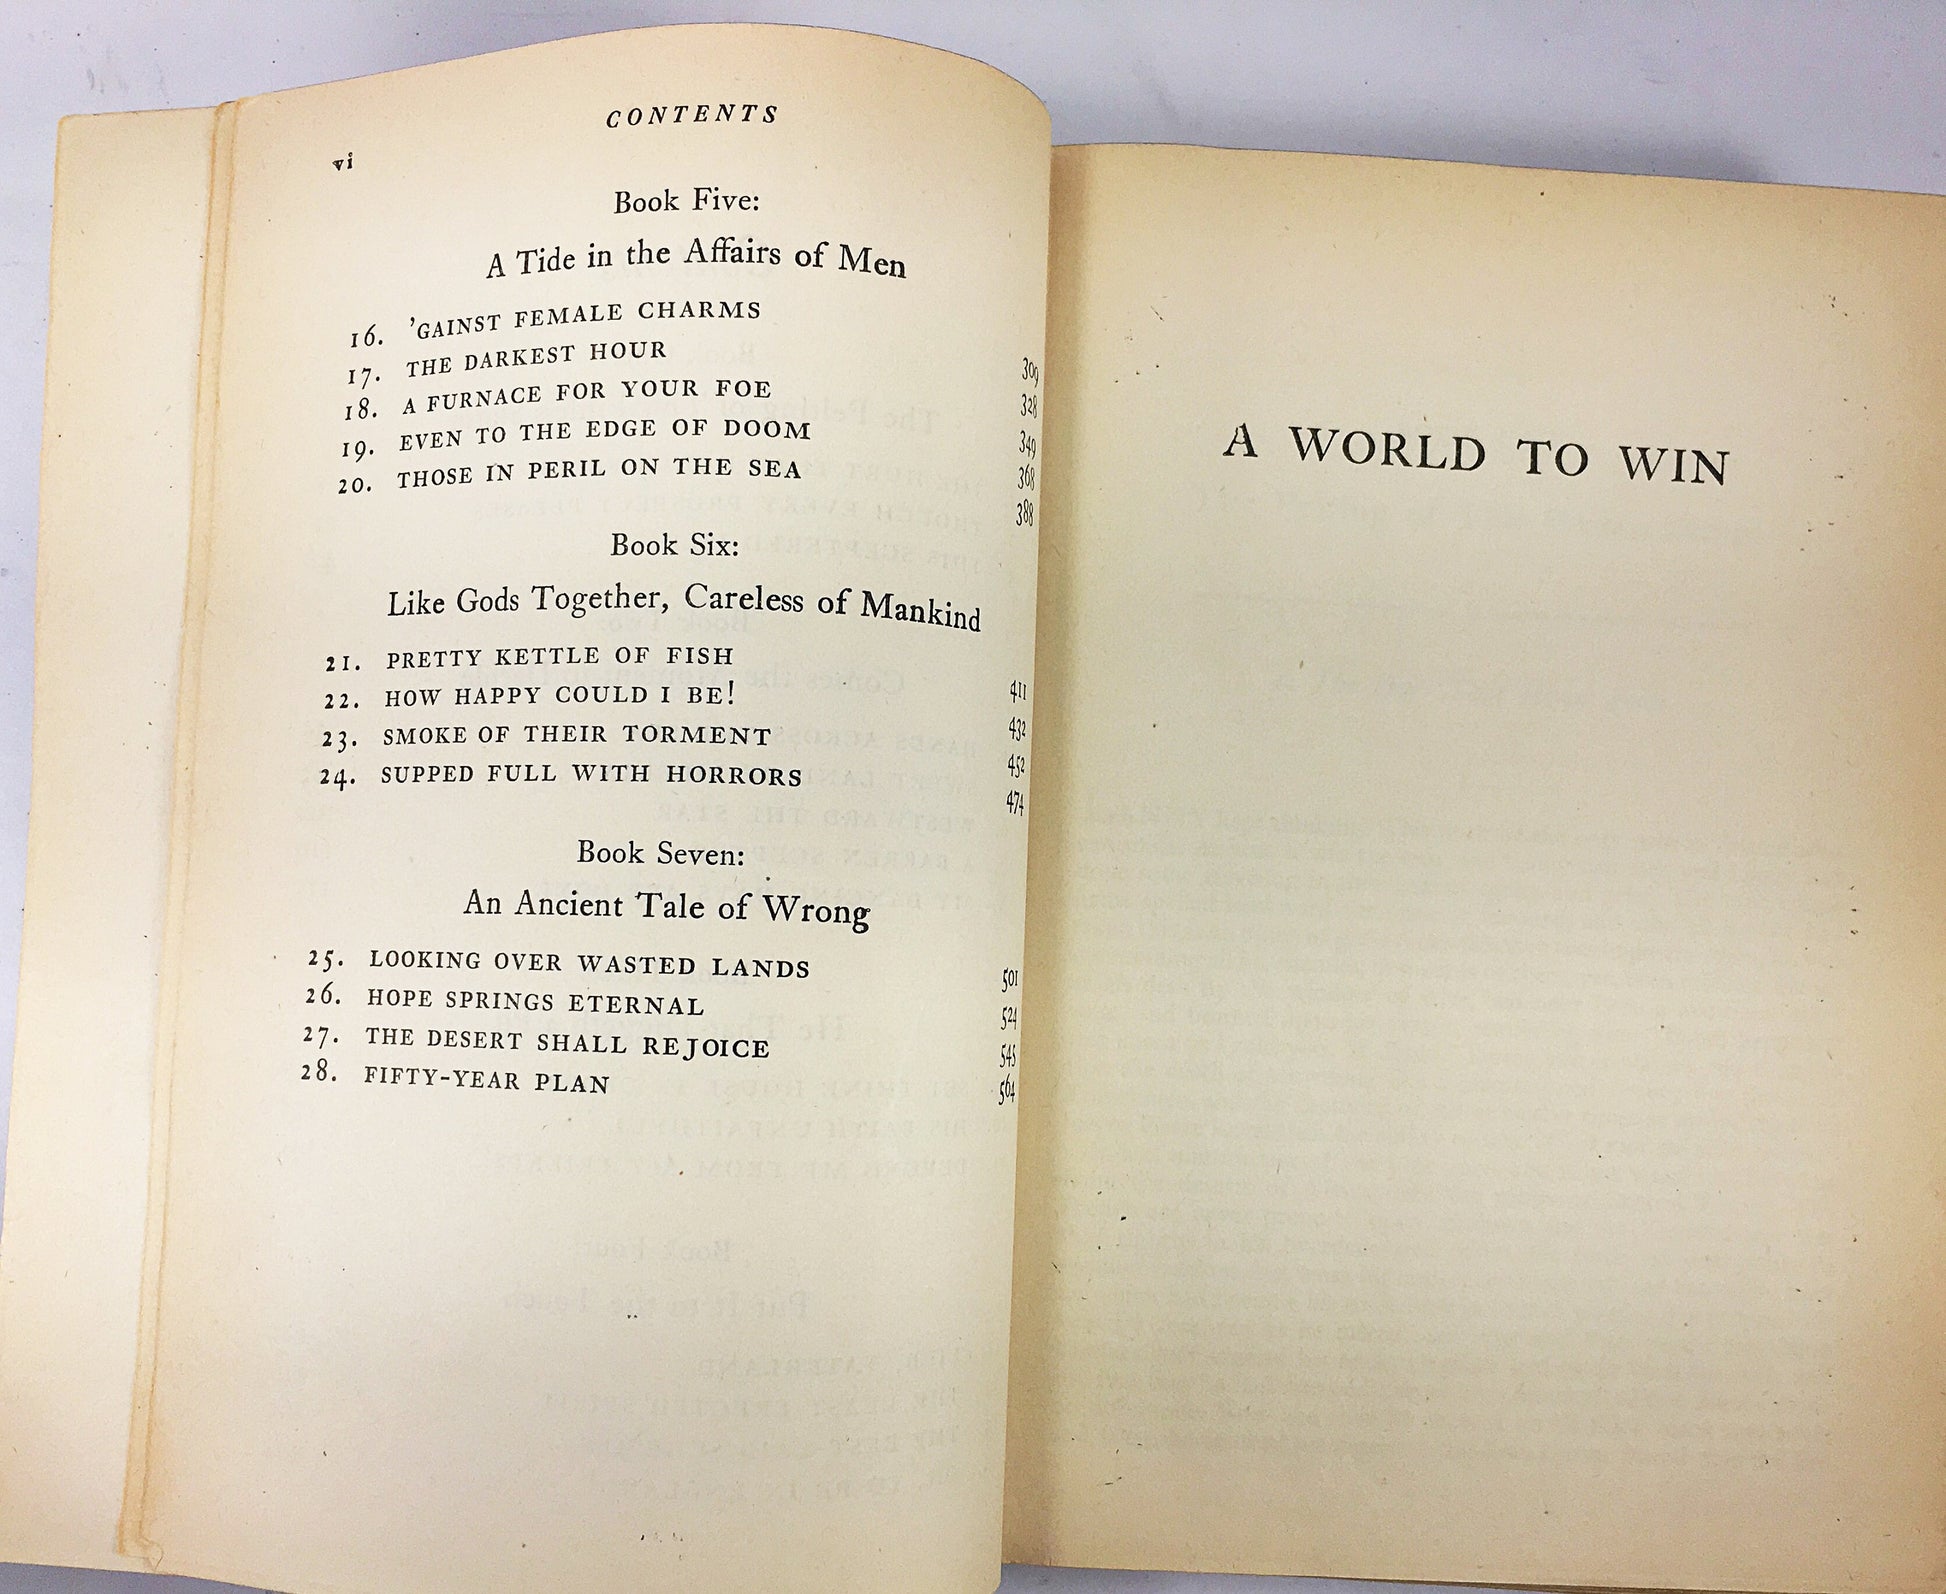 A World to Win by Upton Sinclair. FIRST EDITION vintage book circa 1946. Lanny Budd series. Pulitzer Prize winning author. Red book decor